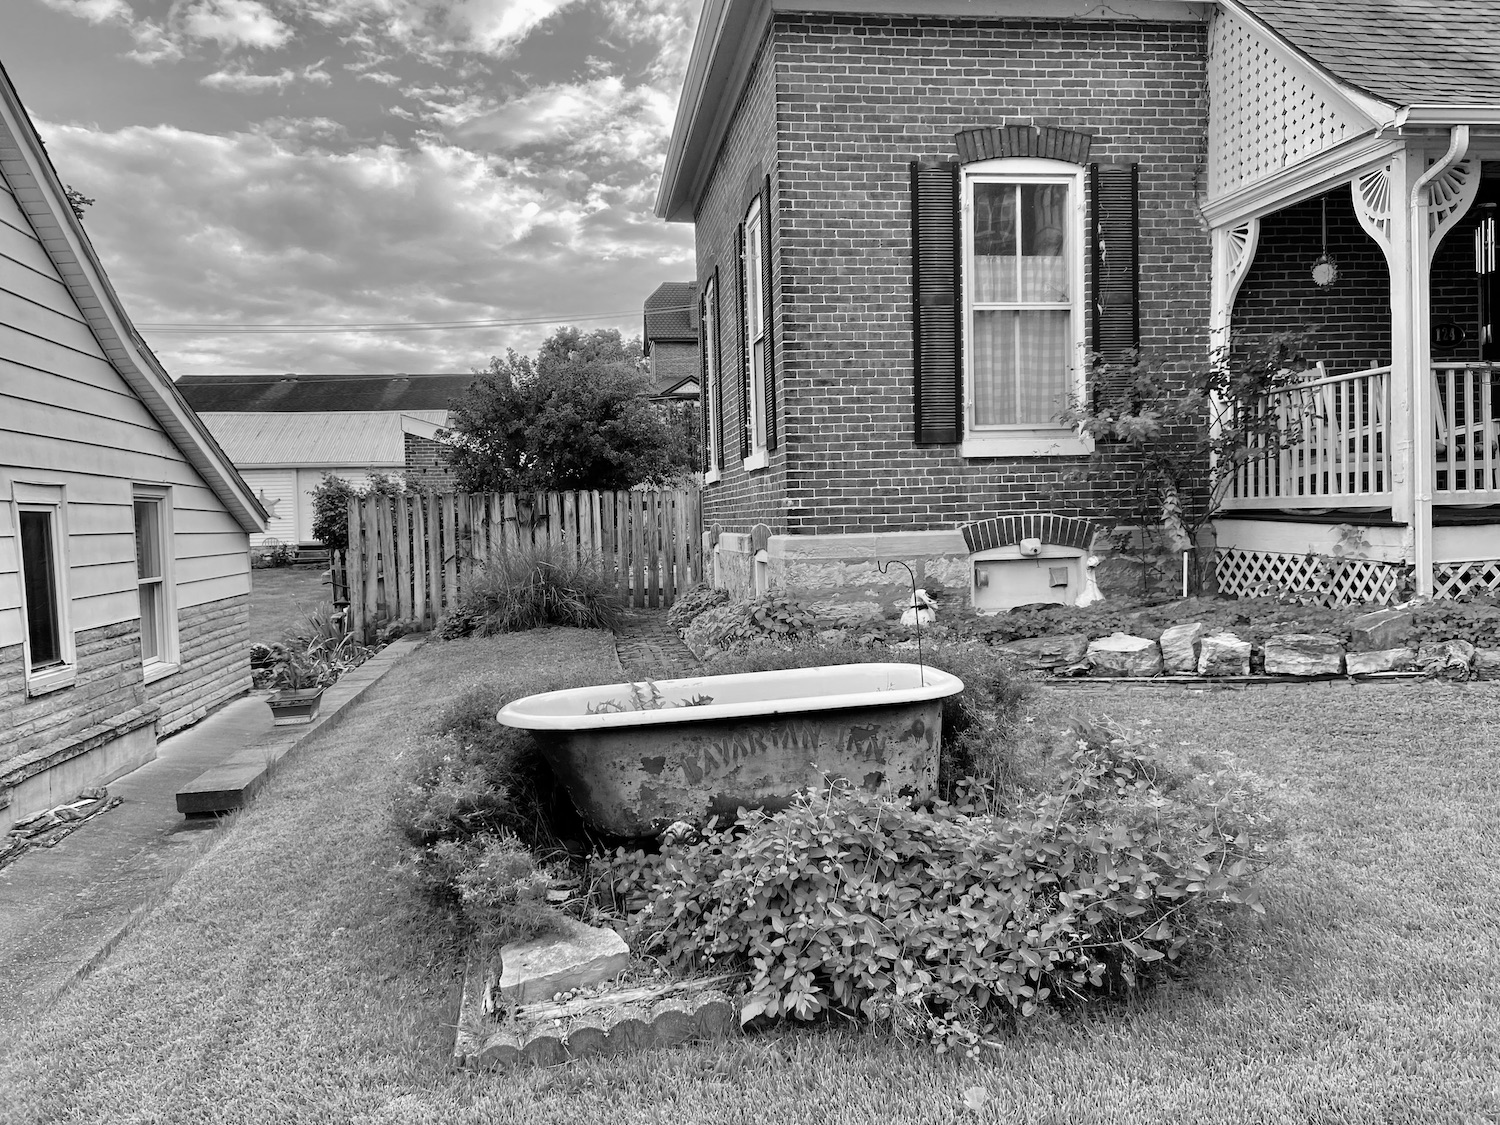 Black and white photograph by Keith Davis of a Bathtub on a lawn in Hermann MO 2022